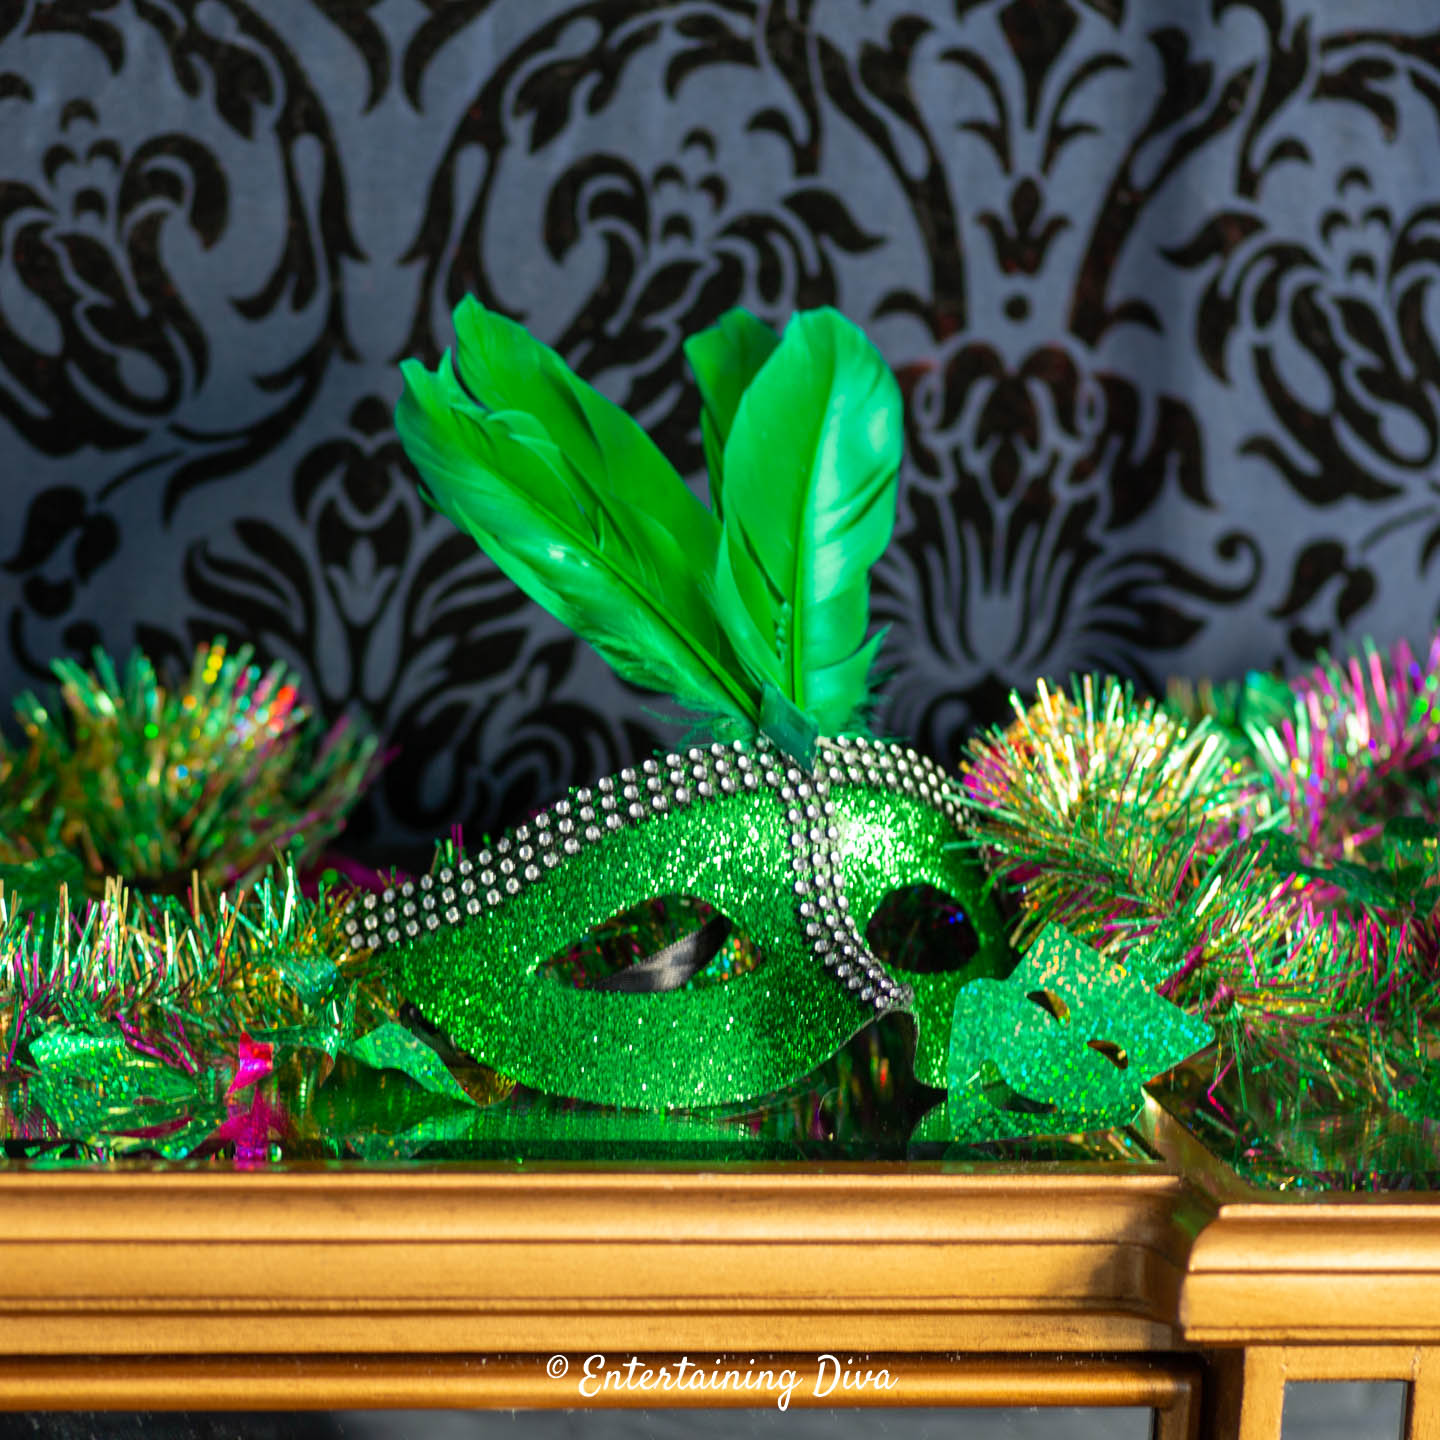 A green mardi gras mask on a table